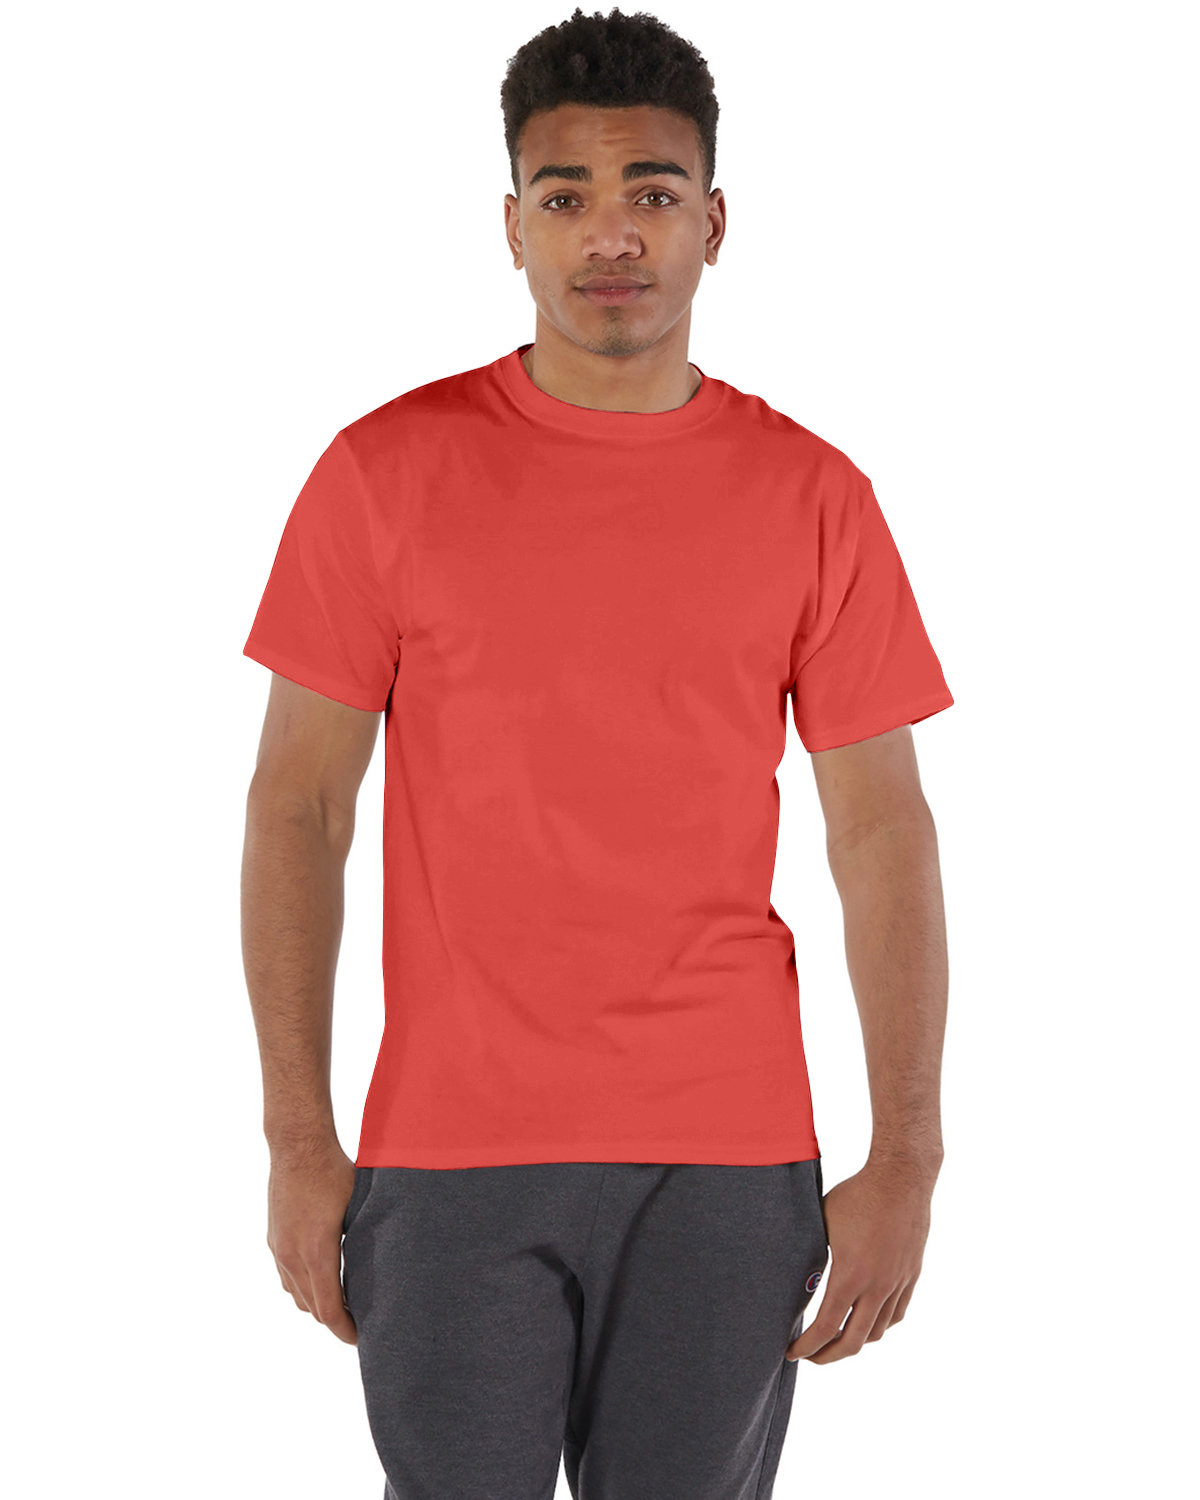 Champion Adult 6 oz. Short-Sleeve T-Shirt RED RIVER CLAY 